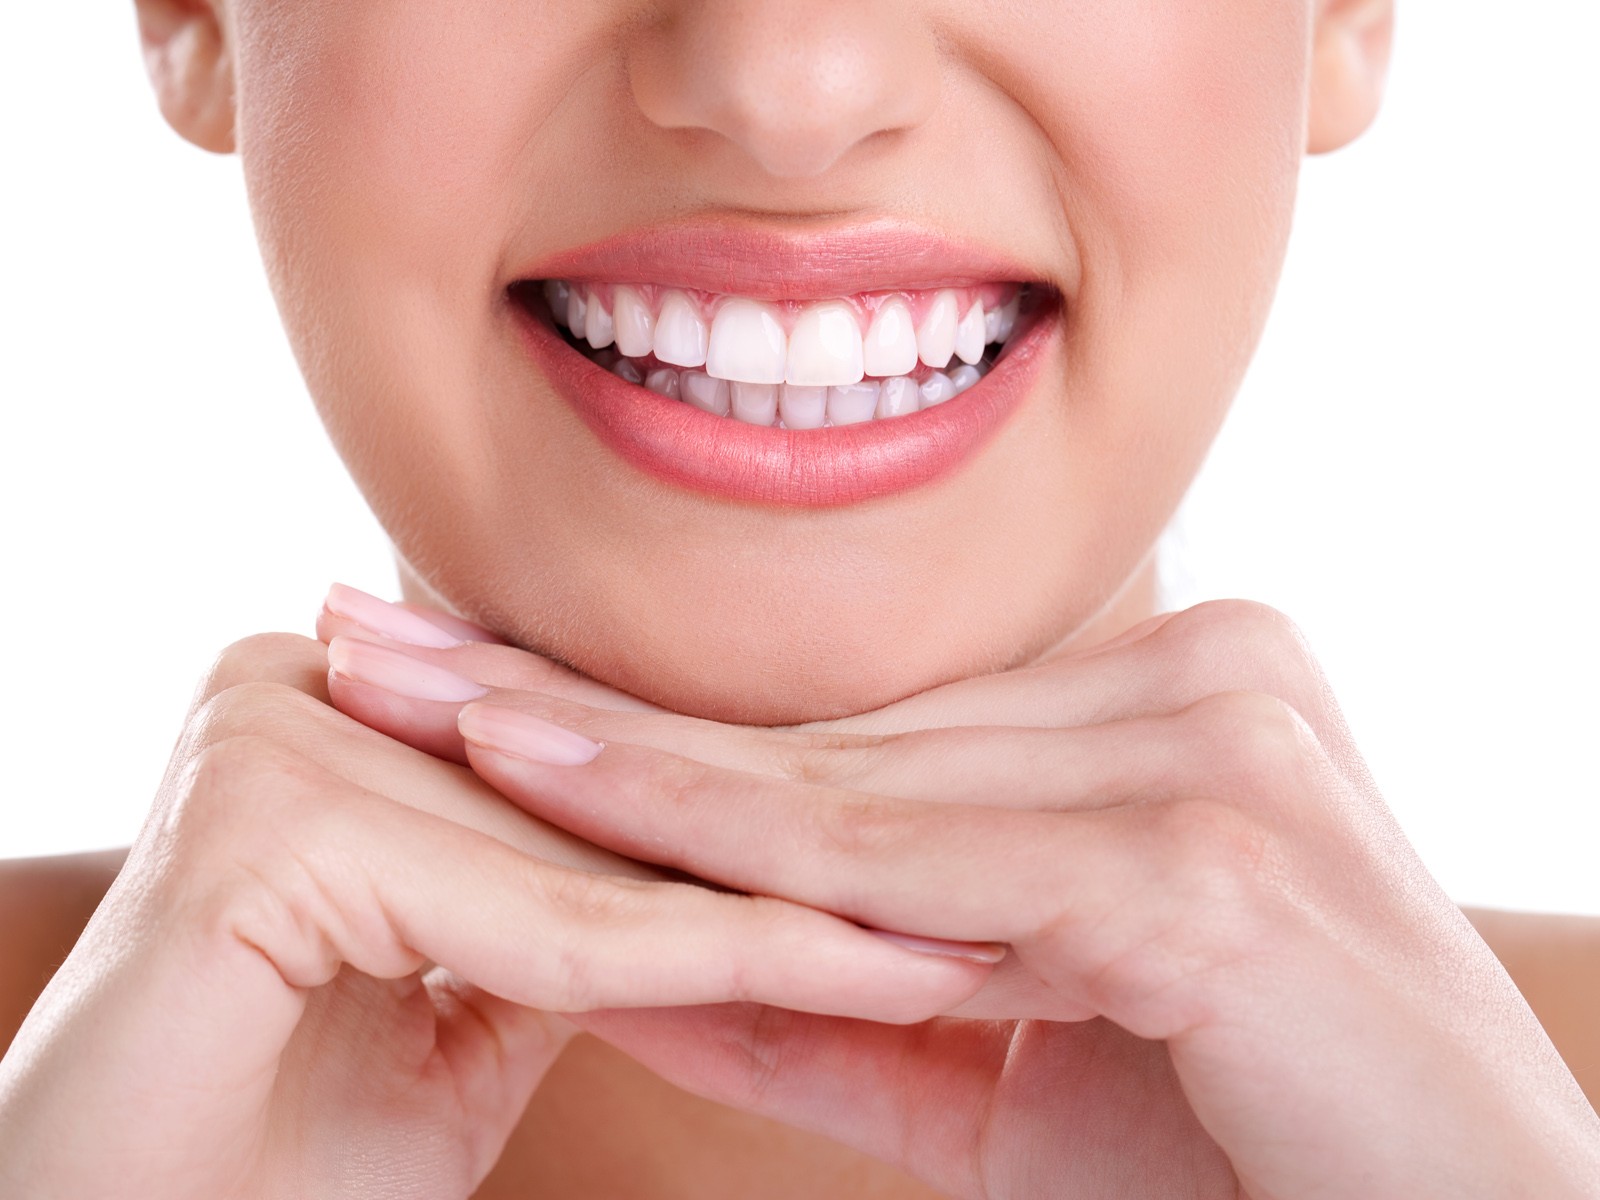 How can I instantly whiten my teeth?